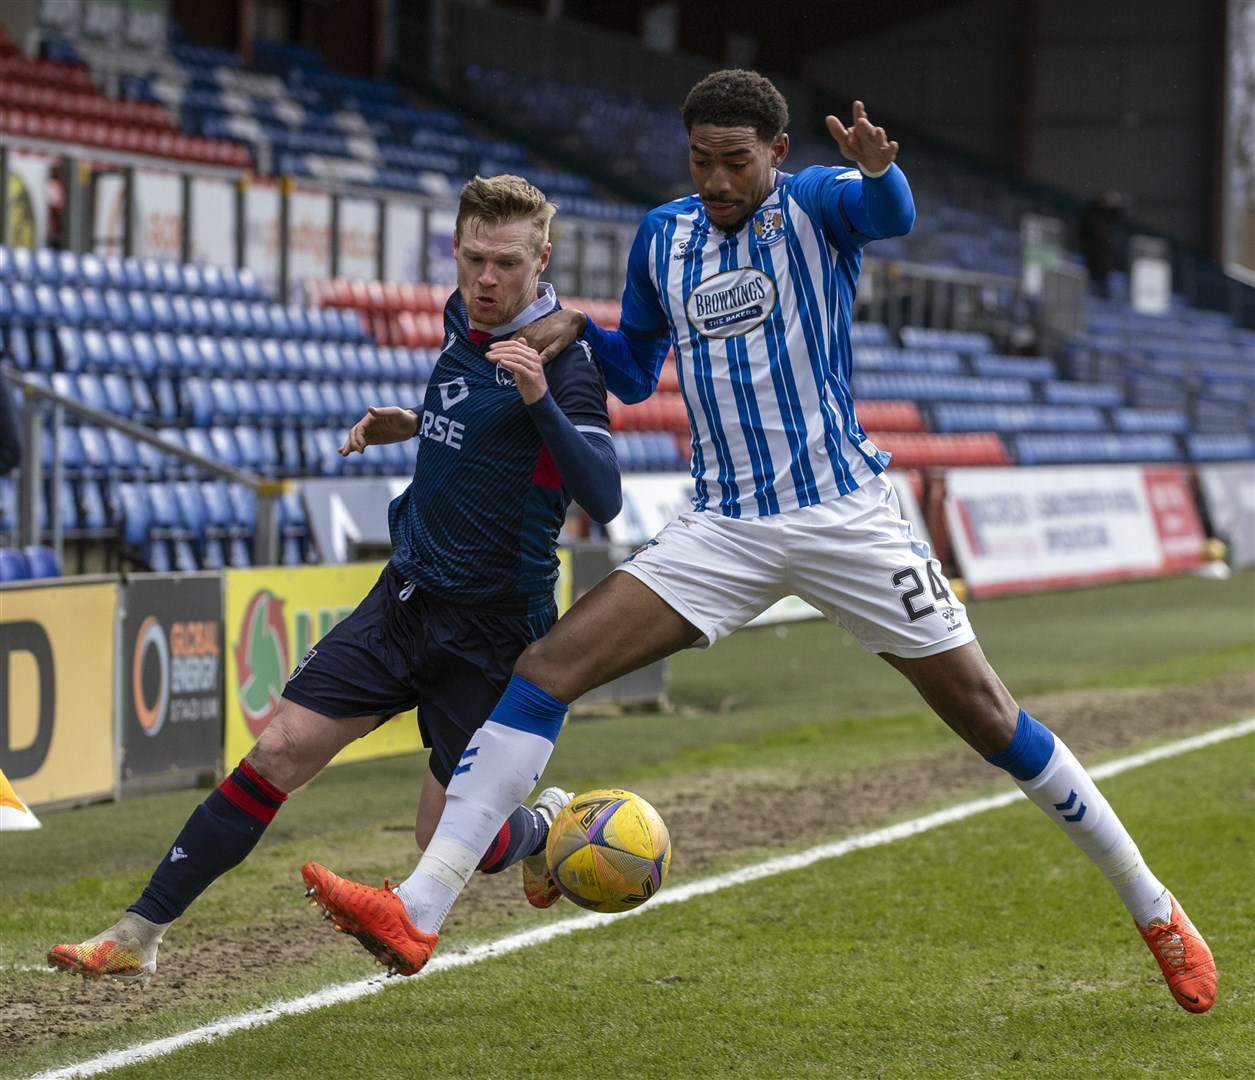 Picture - Ken Macpherson, Inverness. Ross County(3) v Kilmarnock(2). 06.03.21. Ross County's Billy McKay on the attack against Kilmarnock's Zech Medley.